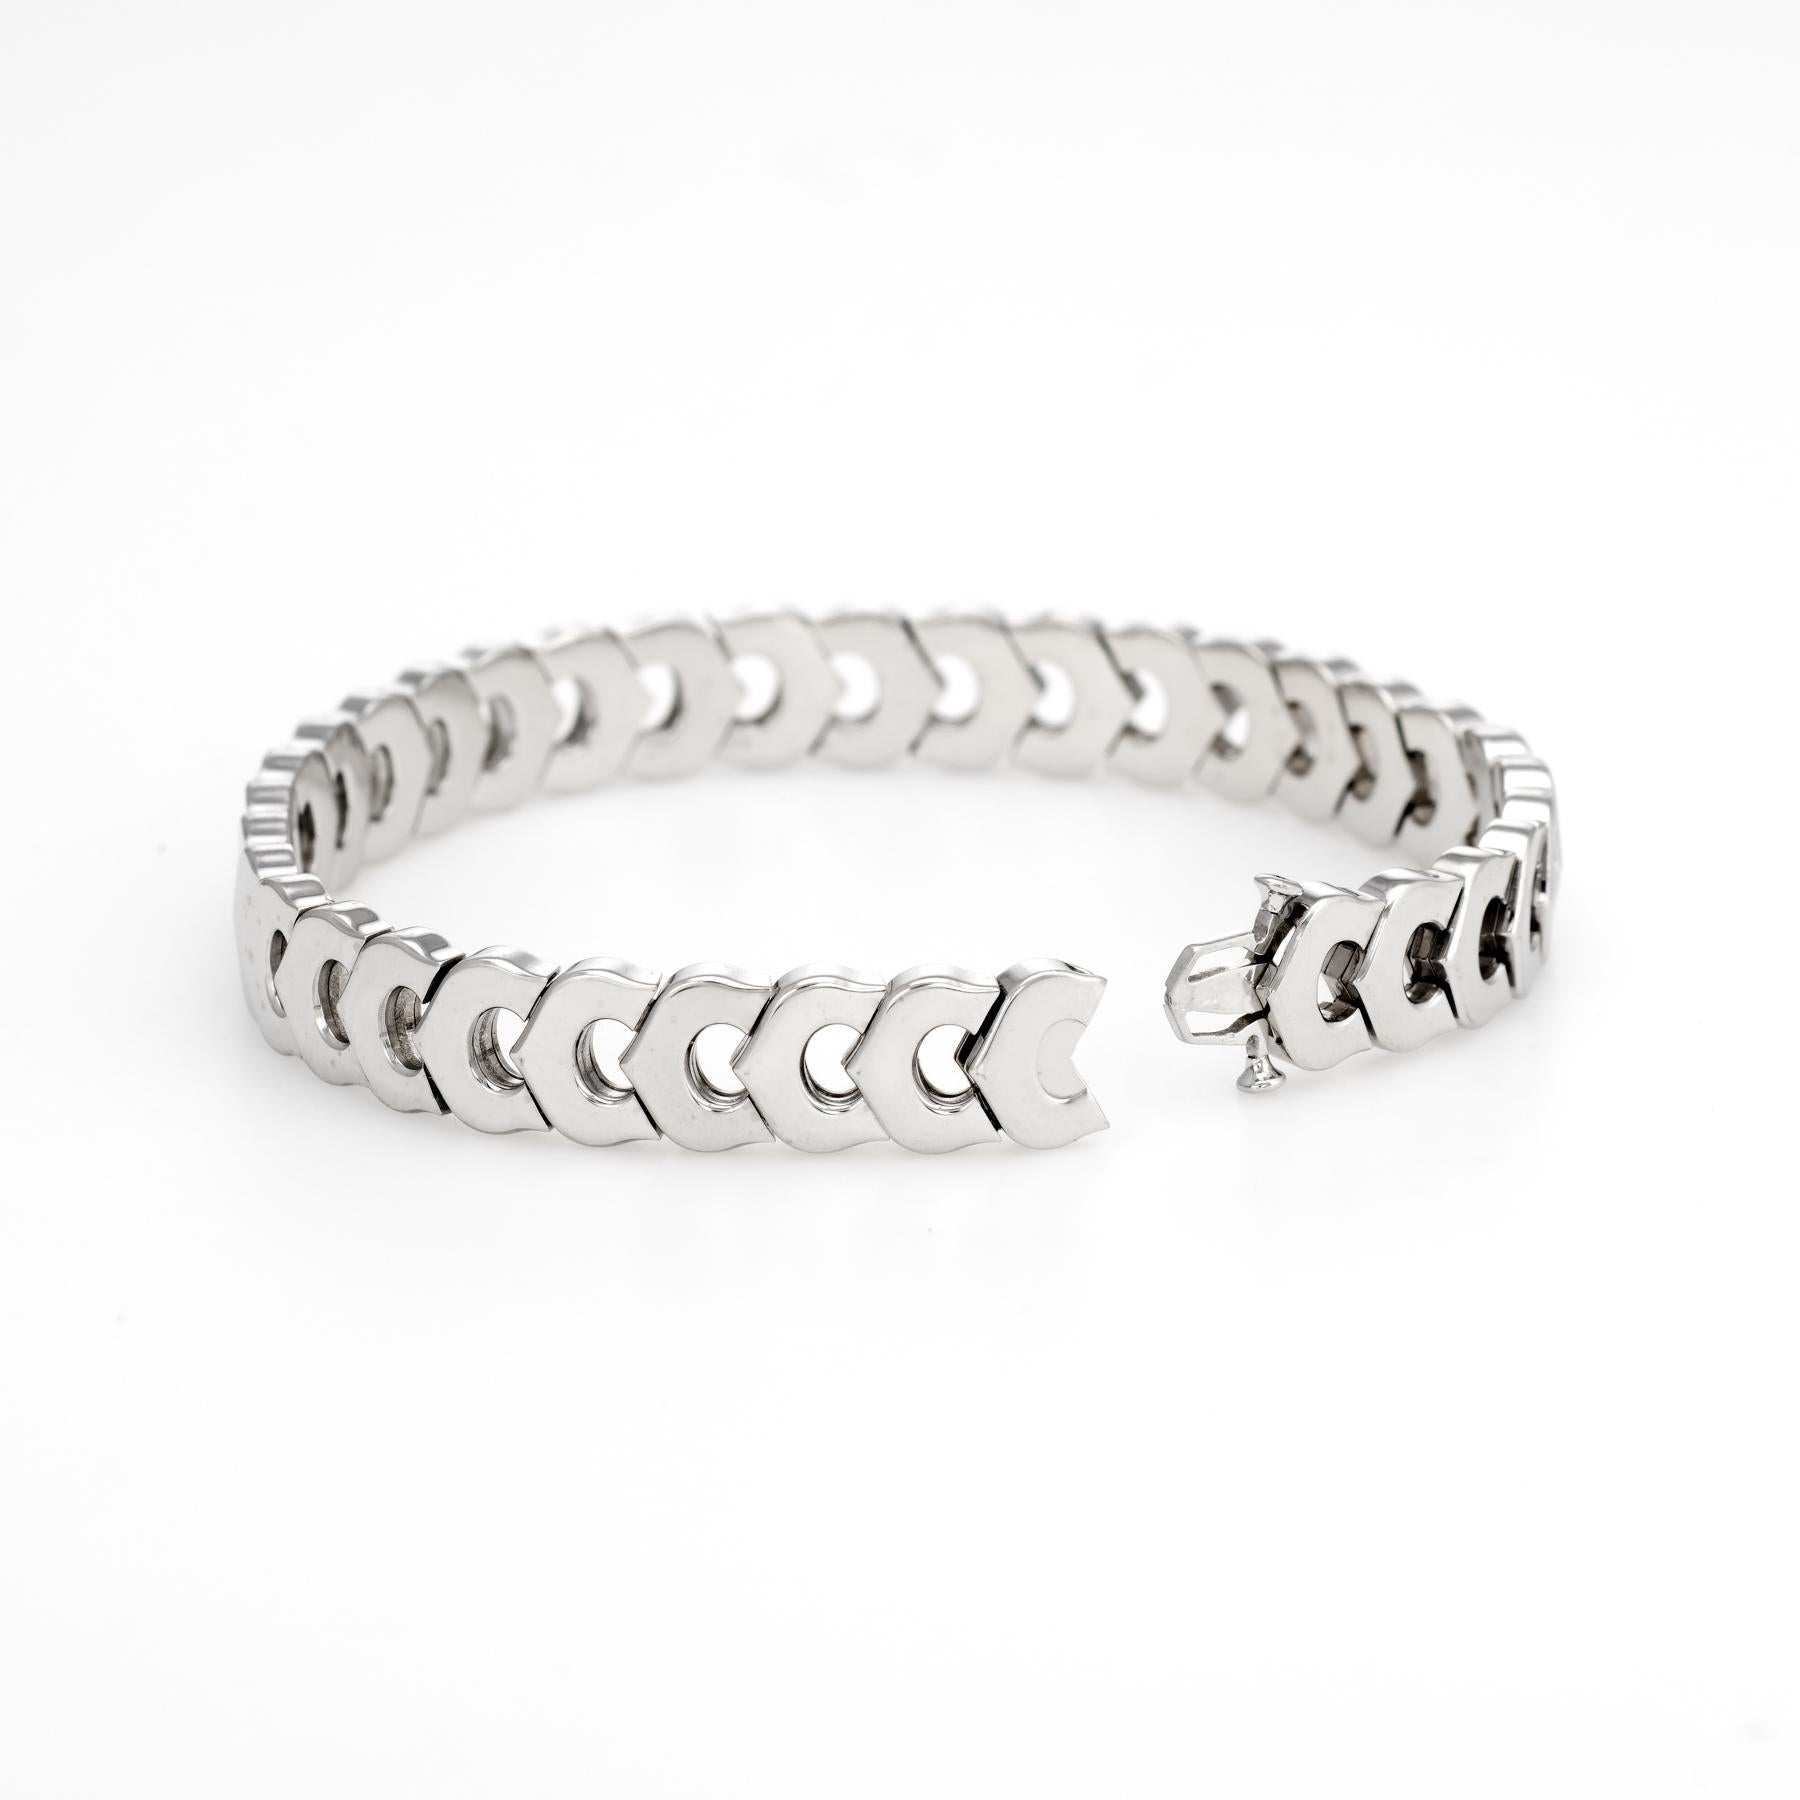 Cartier 'C' logo bracelet, crafted in 18 karat white gold.  

The classic 'C' link bracelet is circa 1980s to 1990s. Great worn alone as a statement bracelet or layered for the ultimate wrist stack. 

The bracelet is in excellent original condition